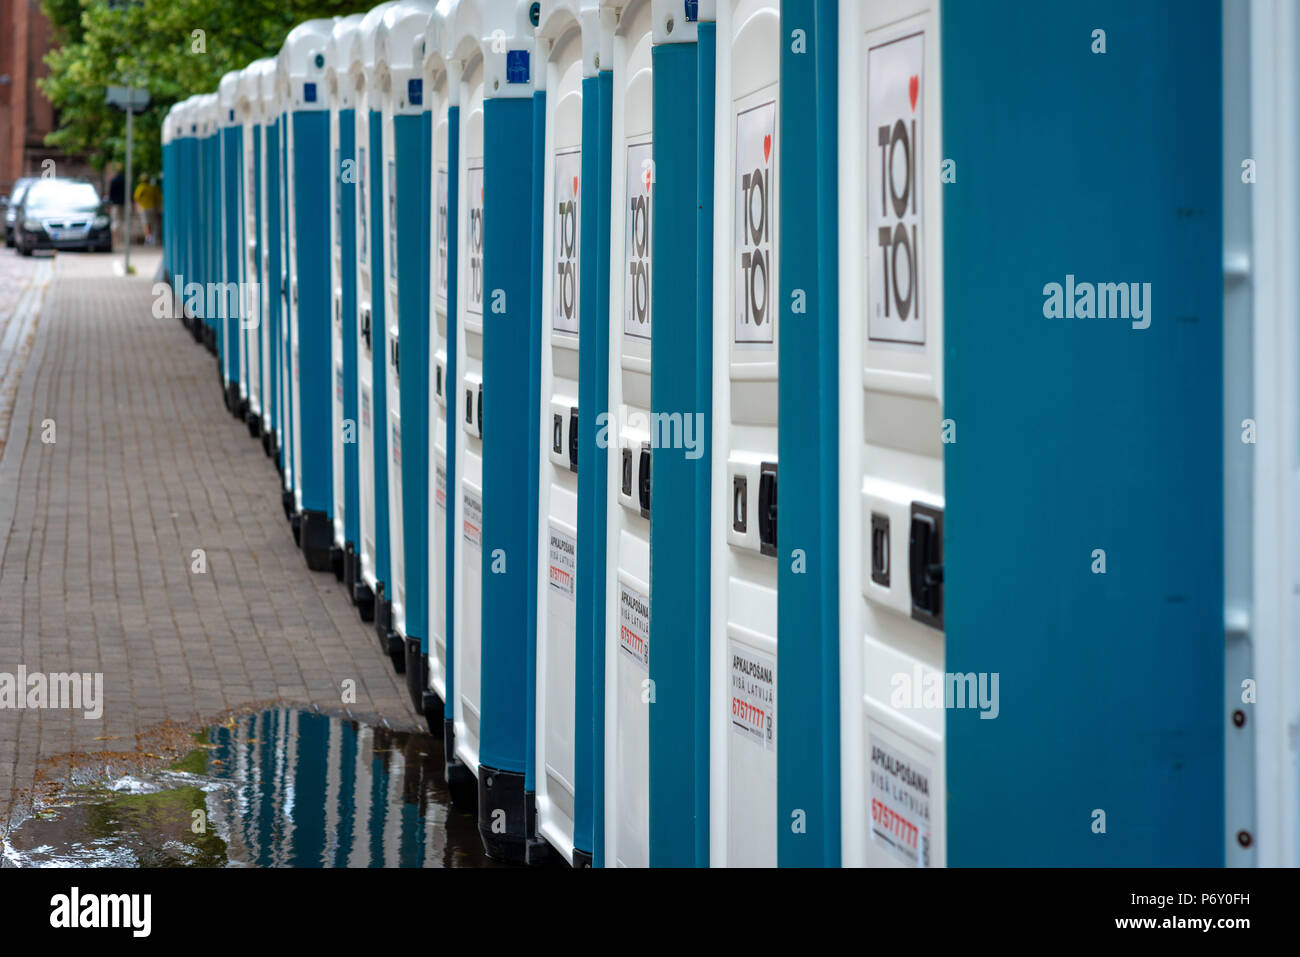 RIGA, LATVIA - JUNE 22, 2018: Summer solstice market. On the edge of City Street there is a row with portable public toilets. Stock Photo